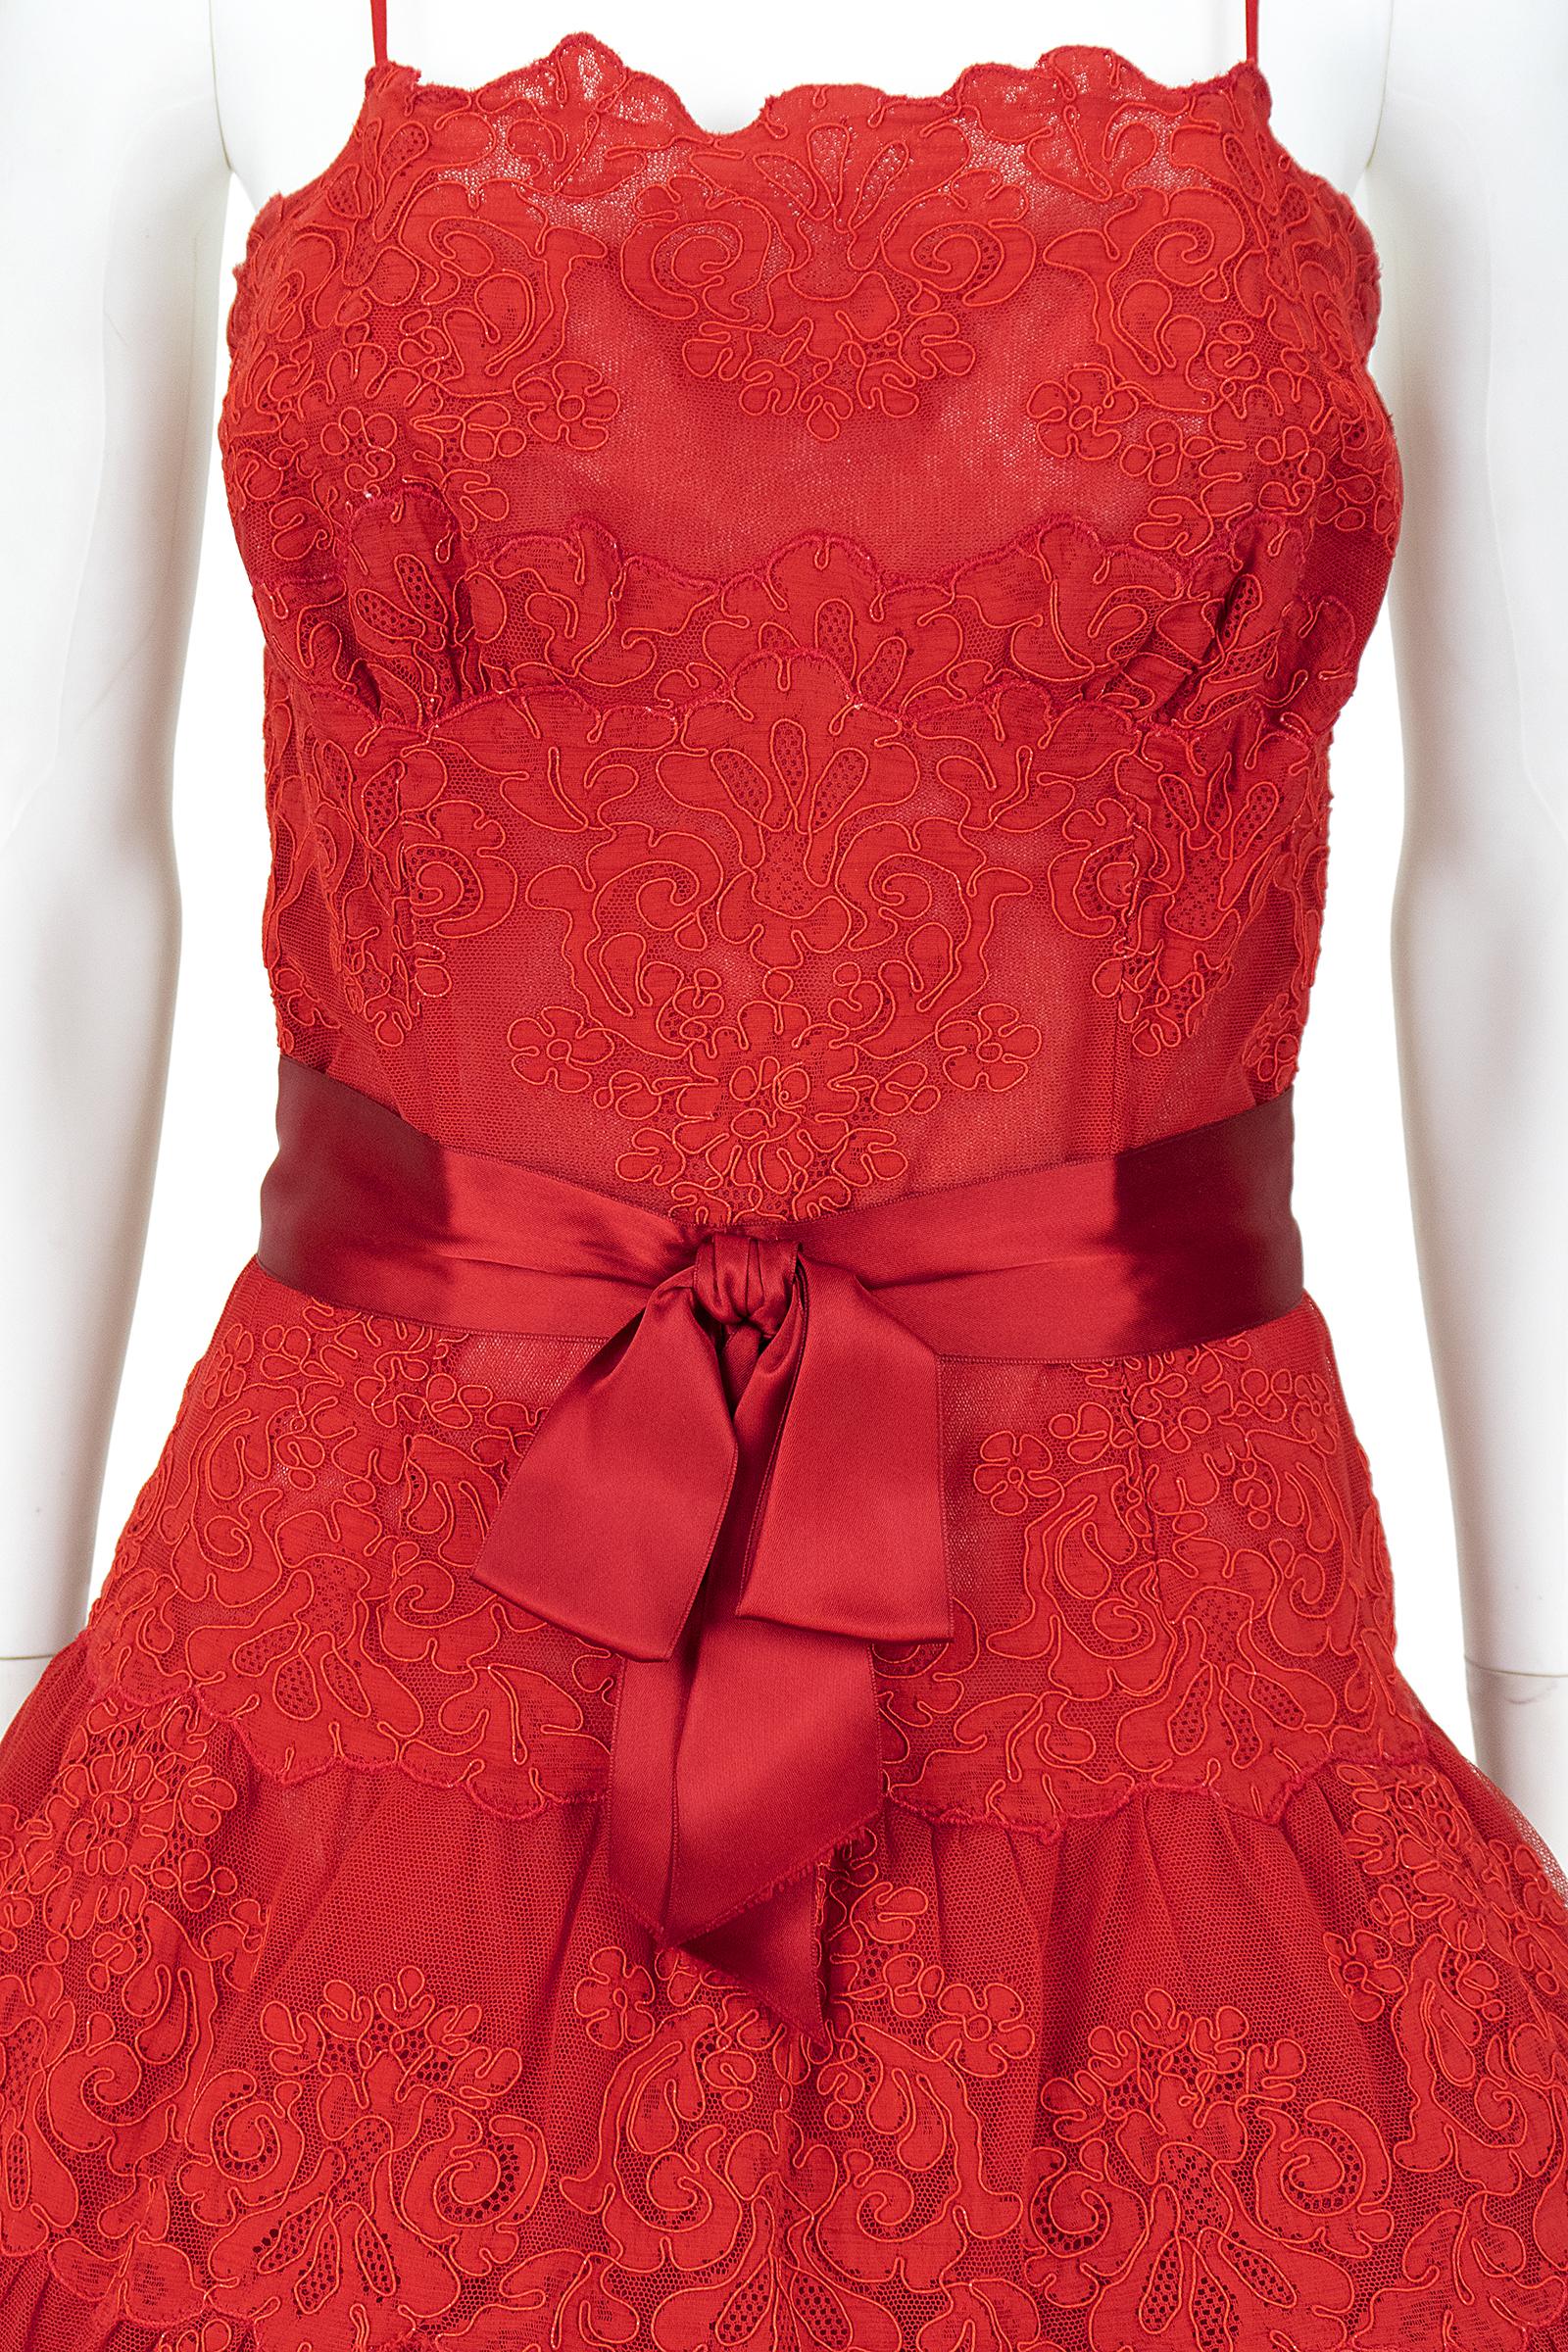 Women's  Vicky Tiel Couture Circa 1990s Red Lace Cocktail Dress For Sale